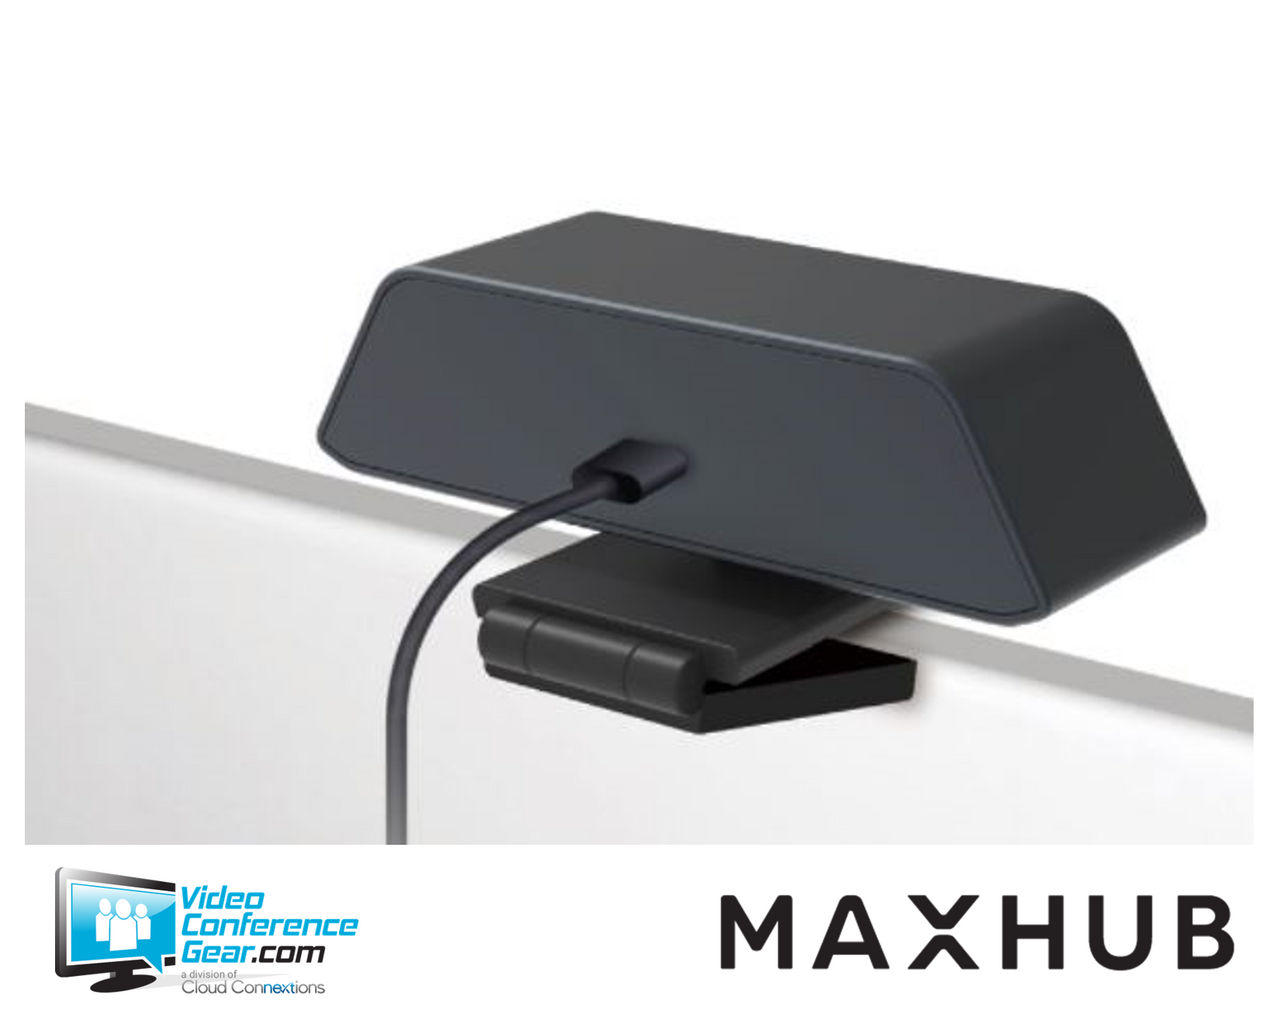 MAXHUB UCW21 4K Webcam with 120 Degree View for Home Office or Small Room